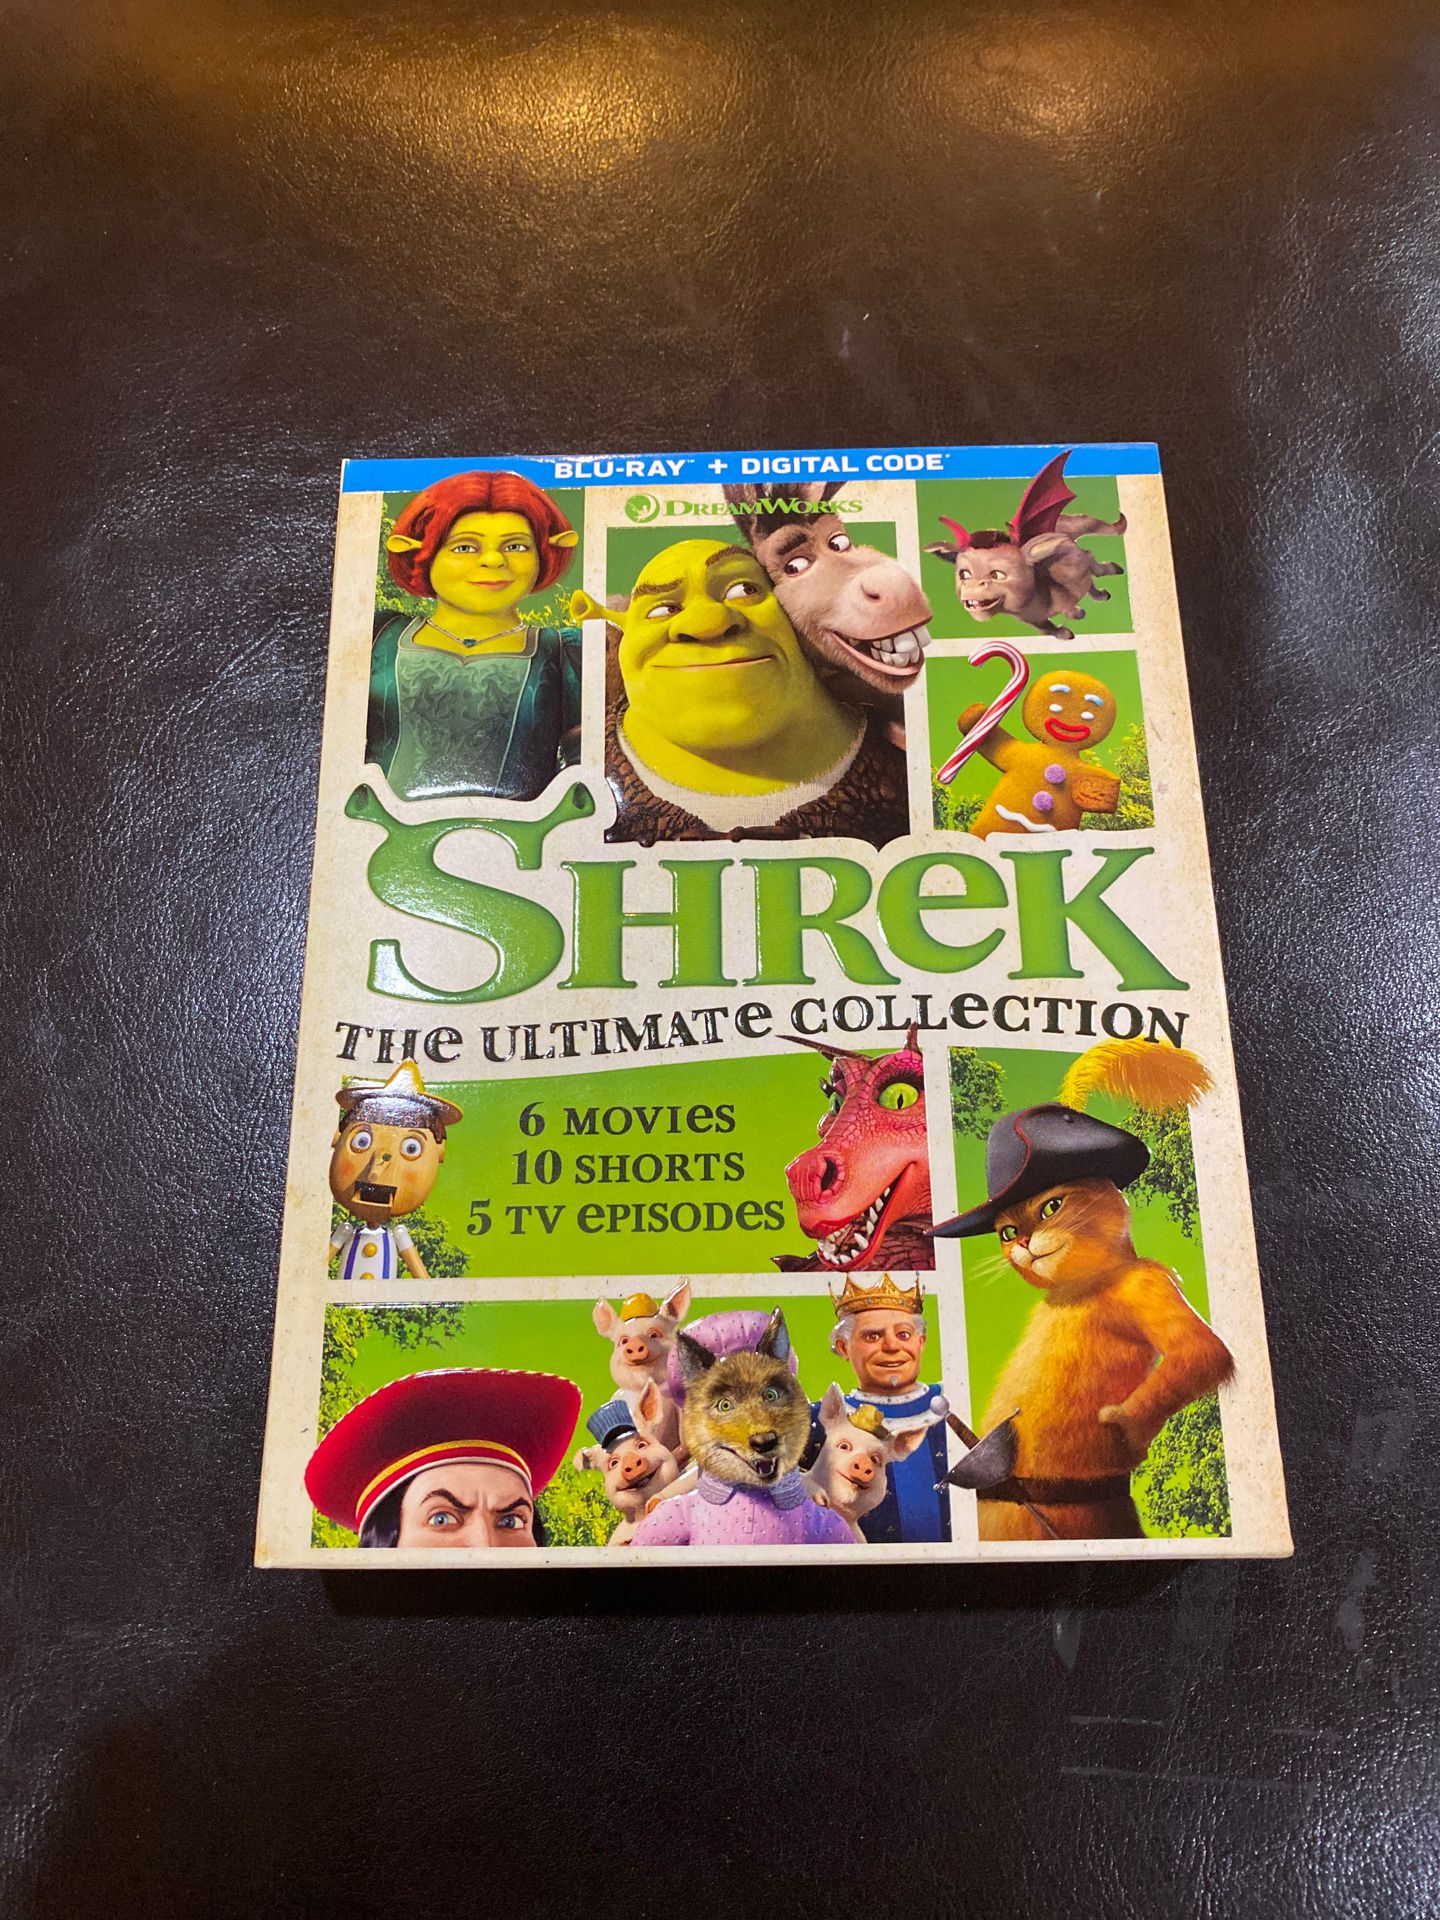 Shrek The Ultimate Collection - 6 Movies / 10 Shorts / 5 TV Episodes